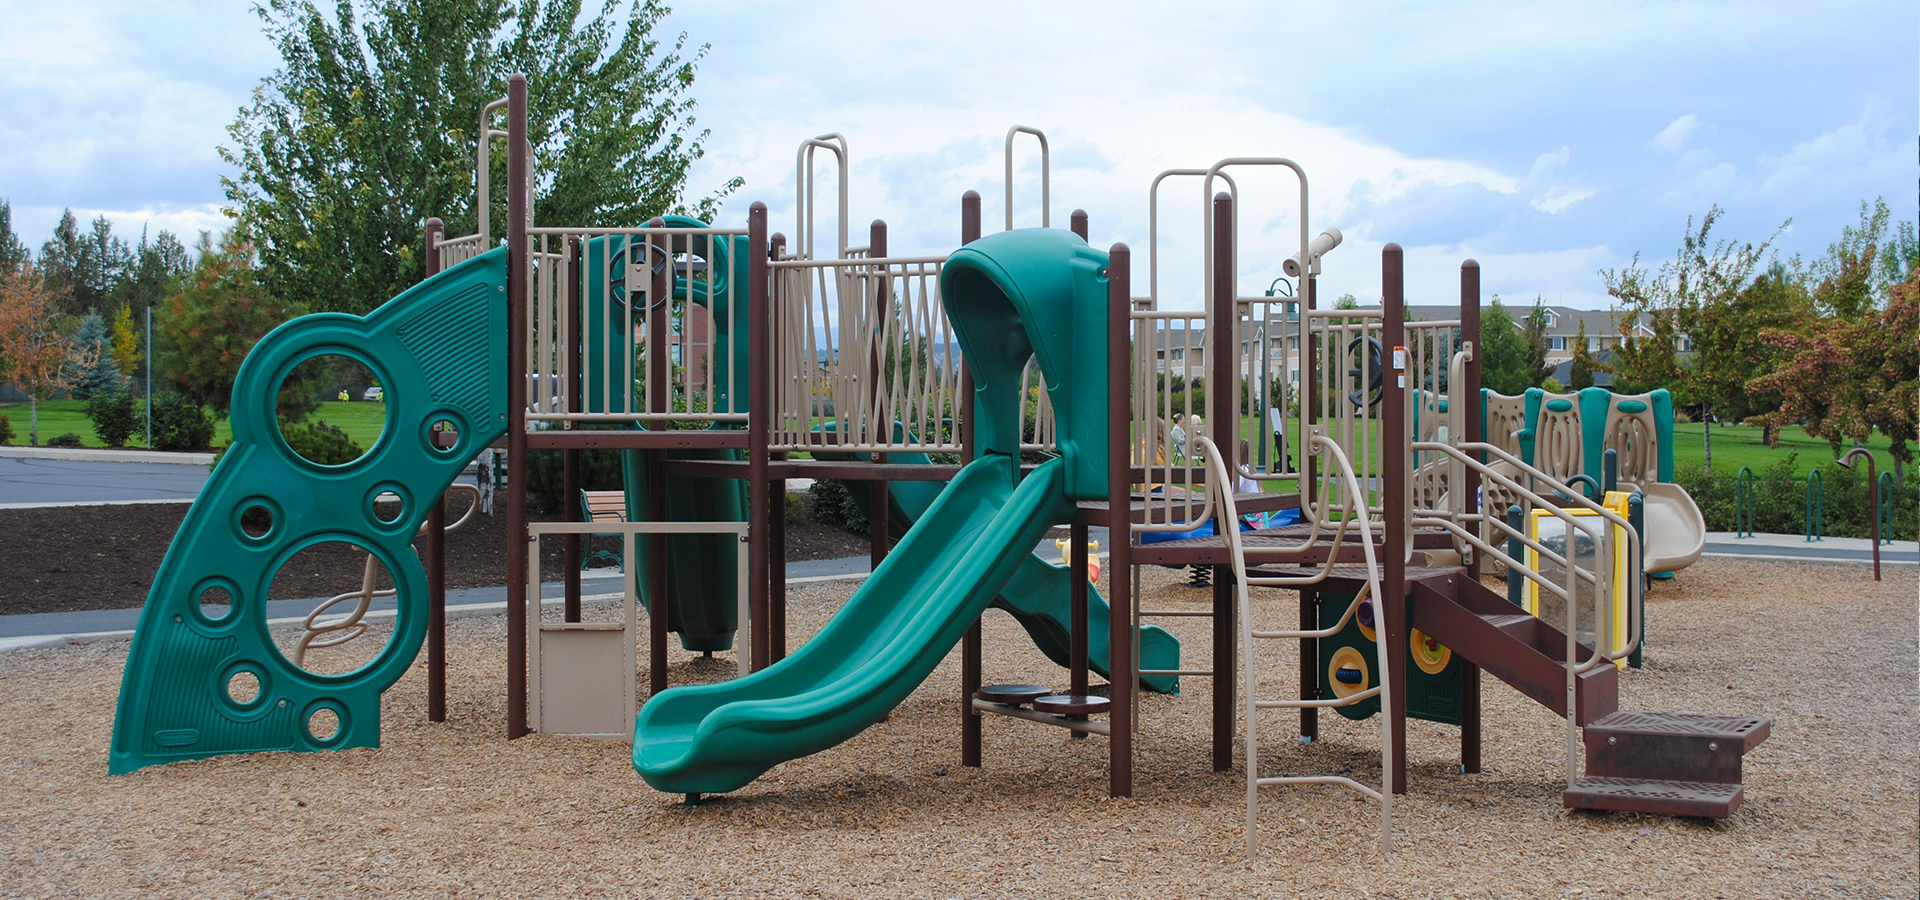 The play structure at Mountain View Park.